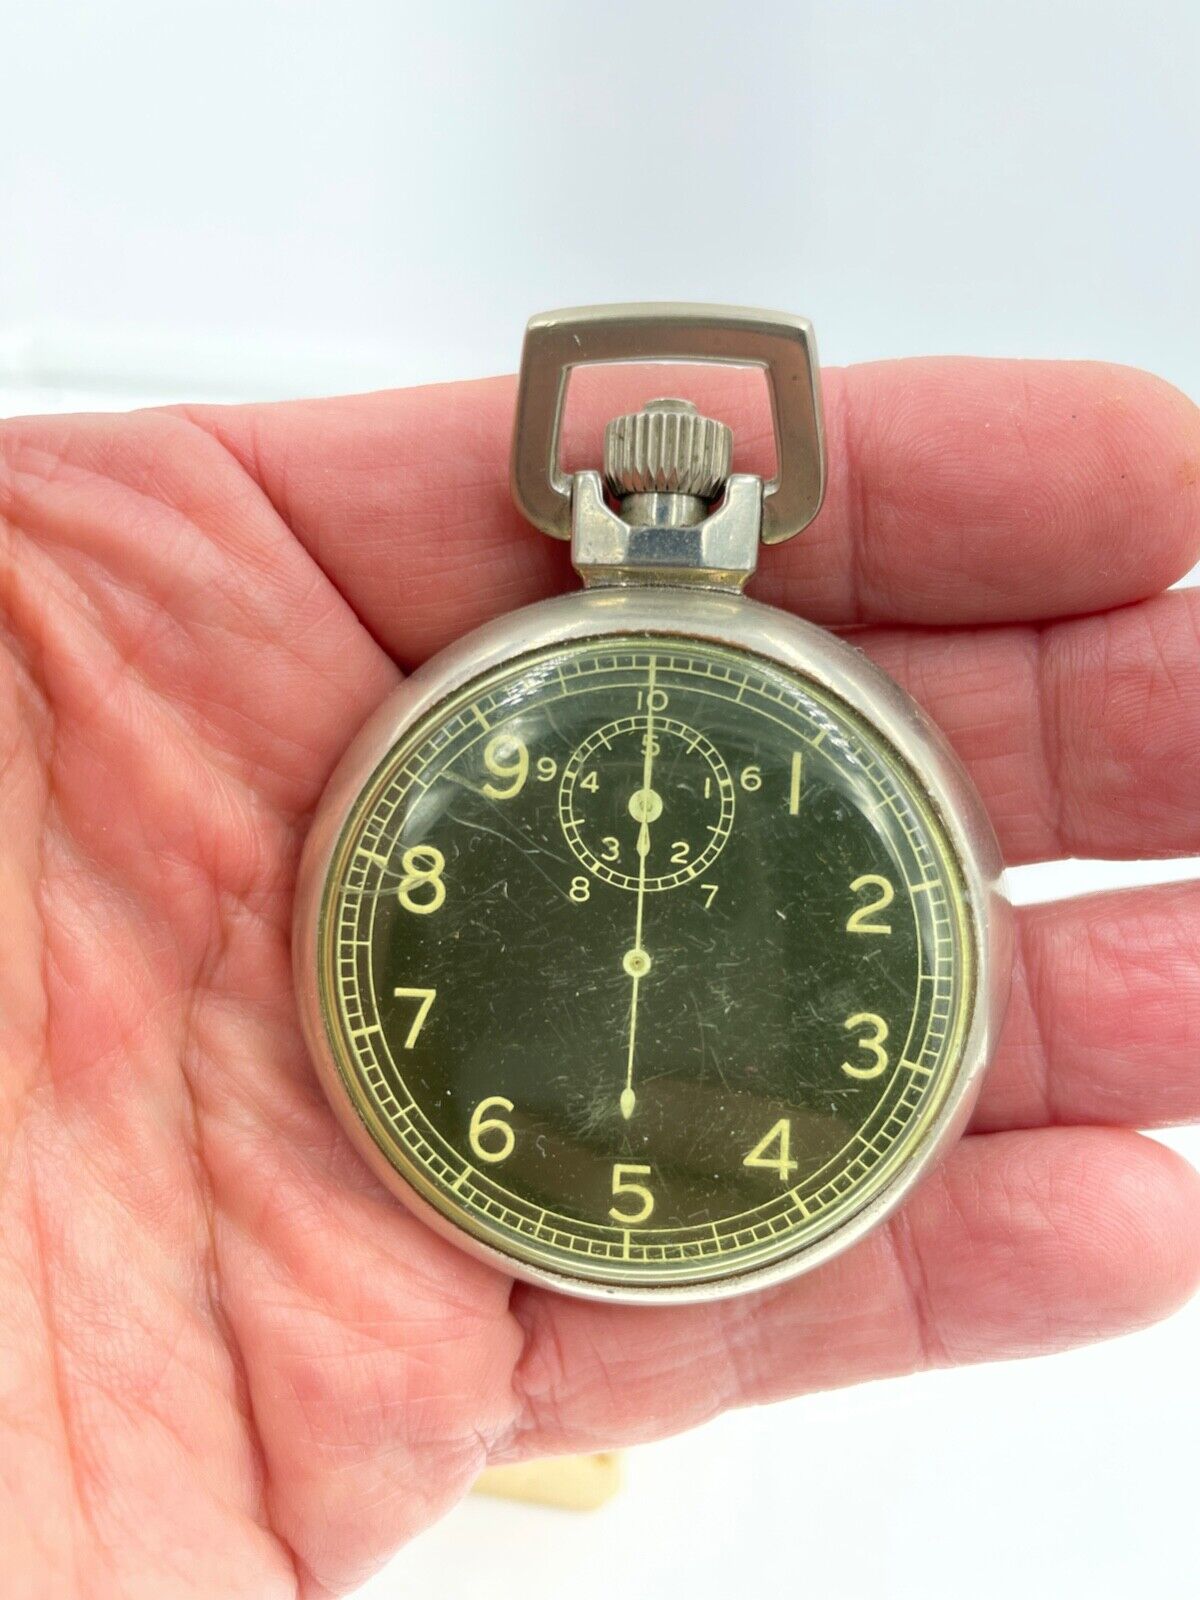 Elgin 1940's US ARMY Military WWII A-8 Watch Timer Jitterbug Movement with box